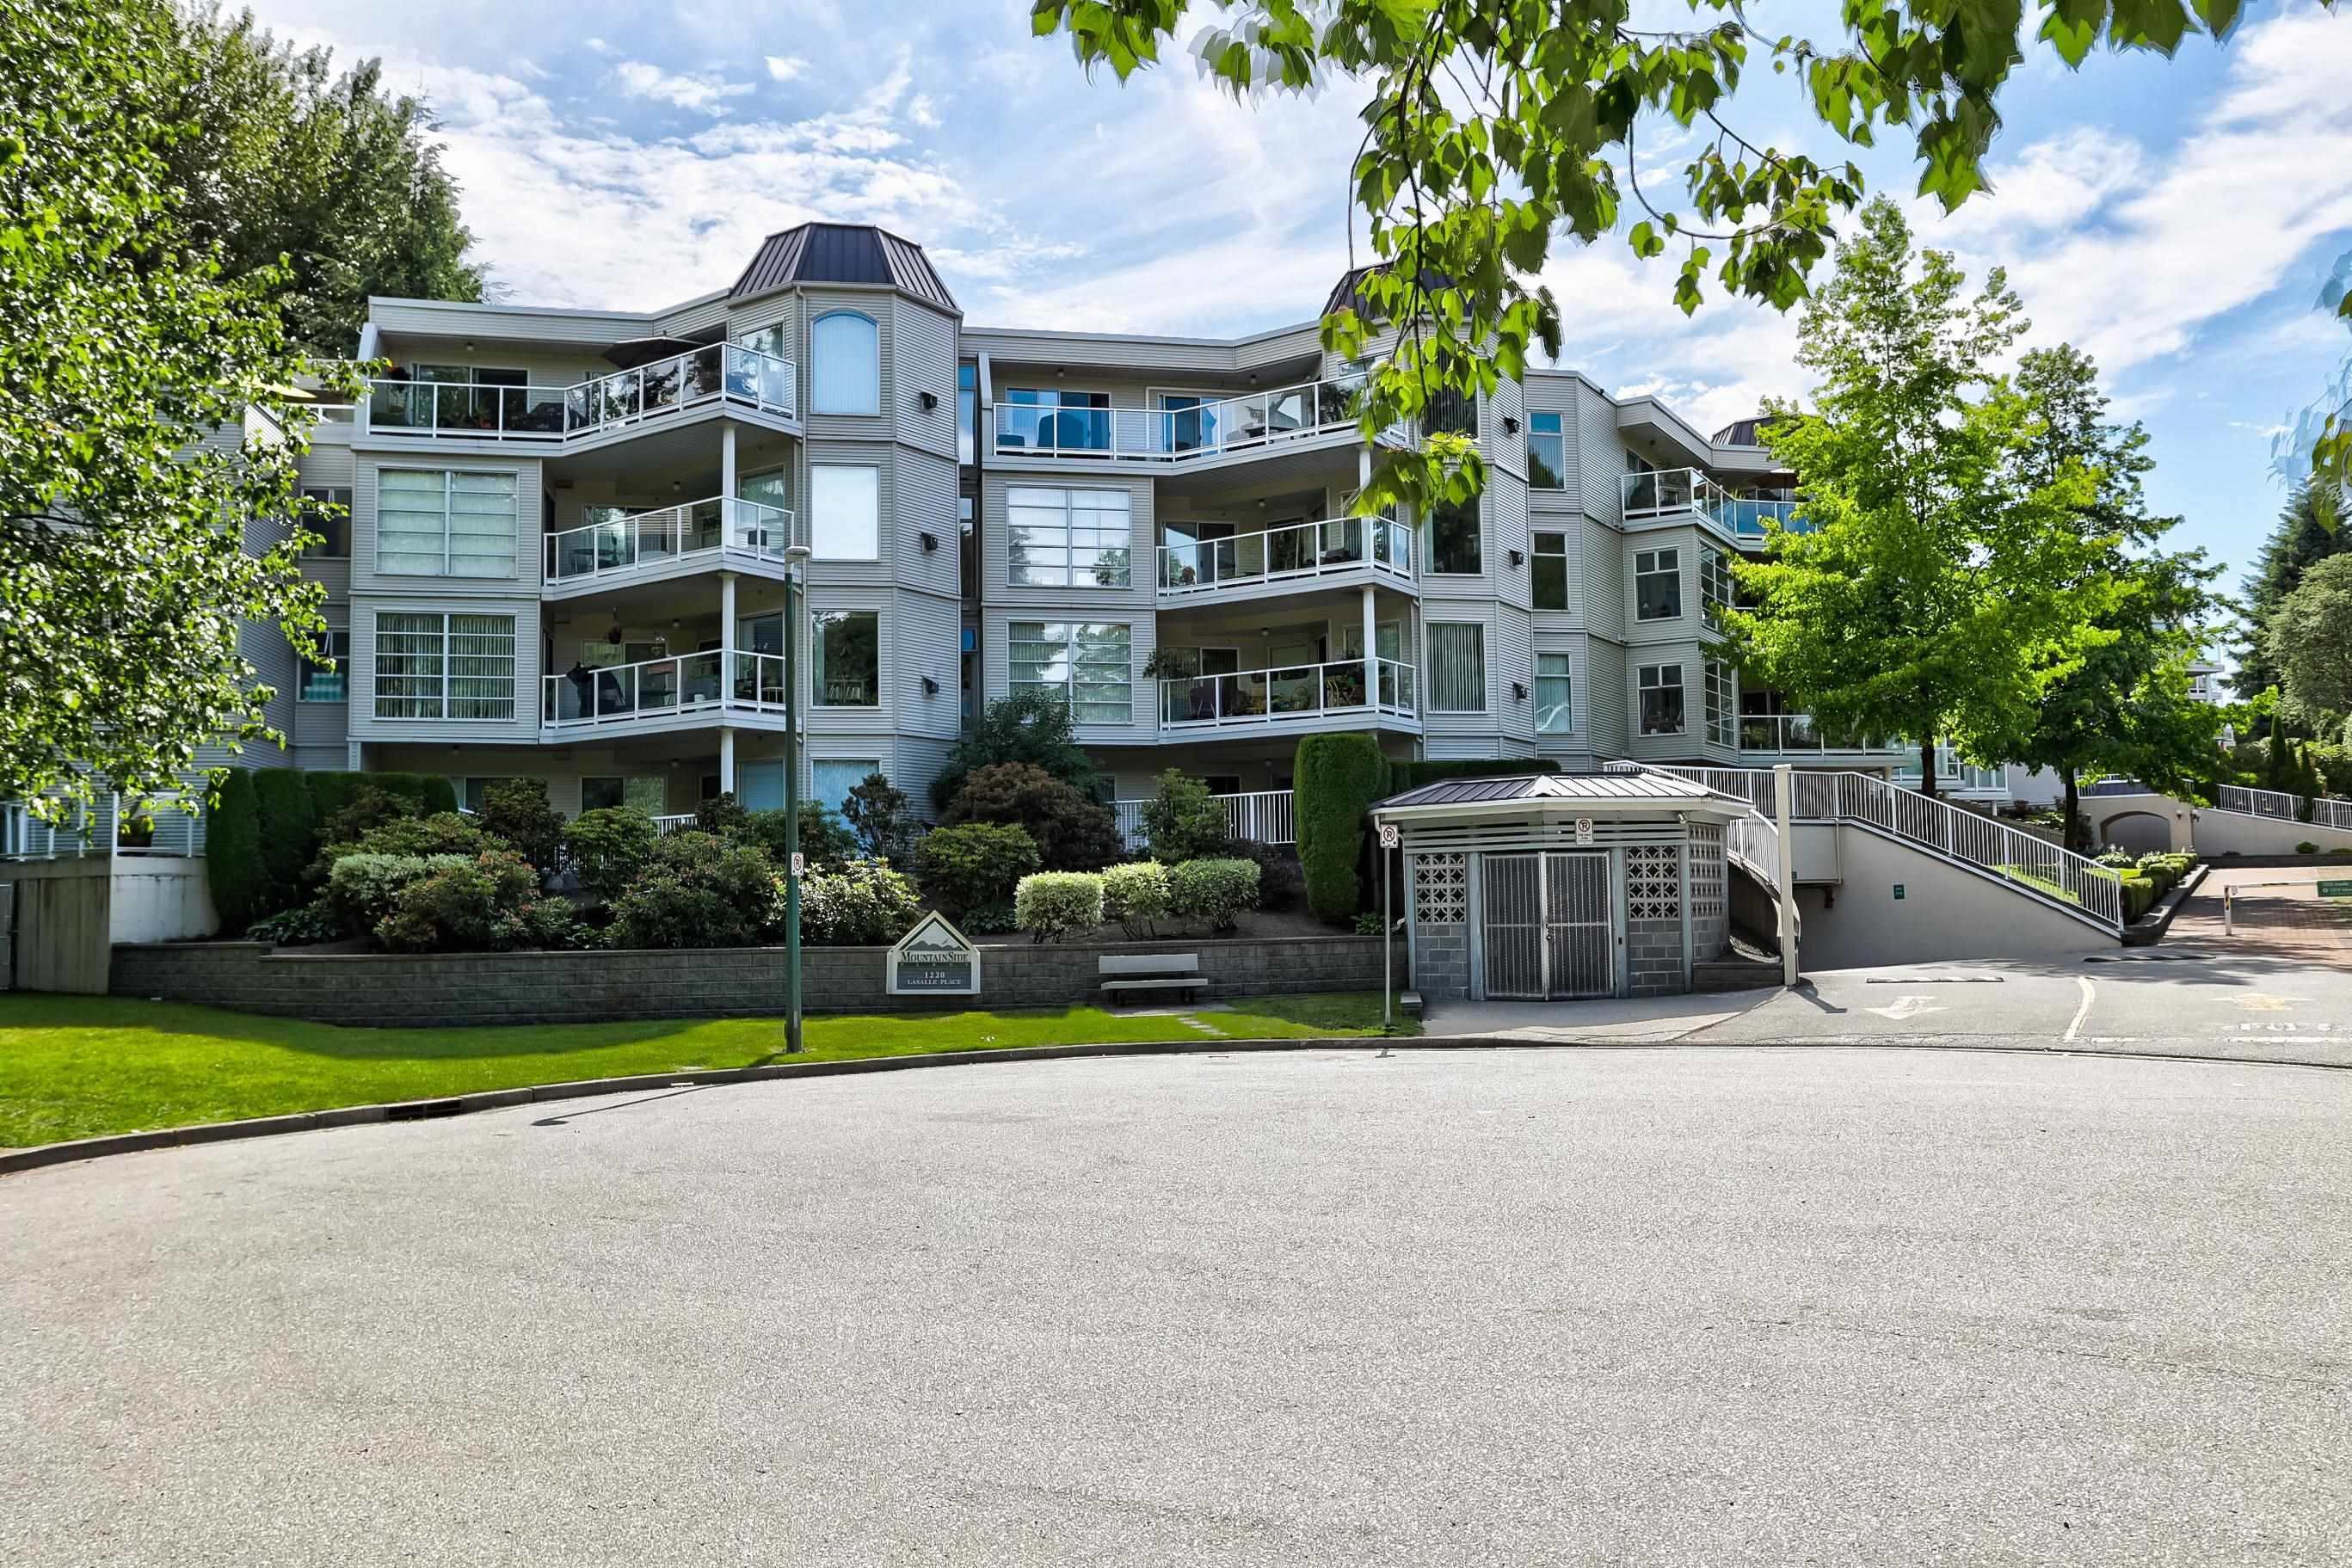 New property listed in Canyon Springs, Coquitlam